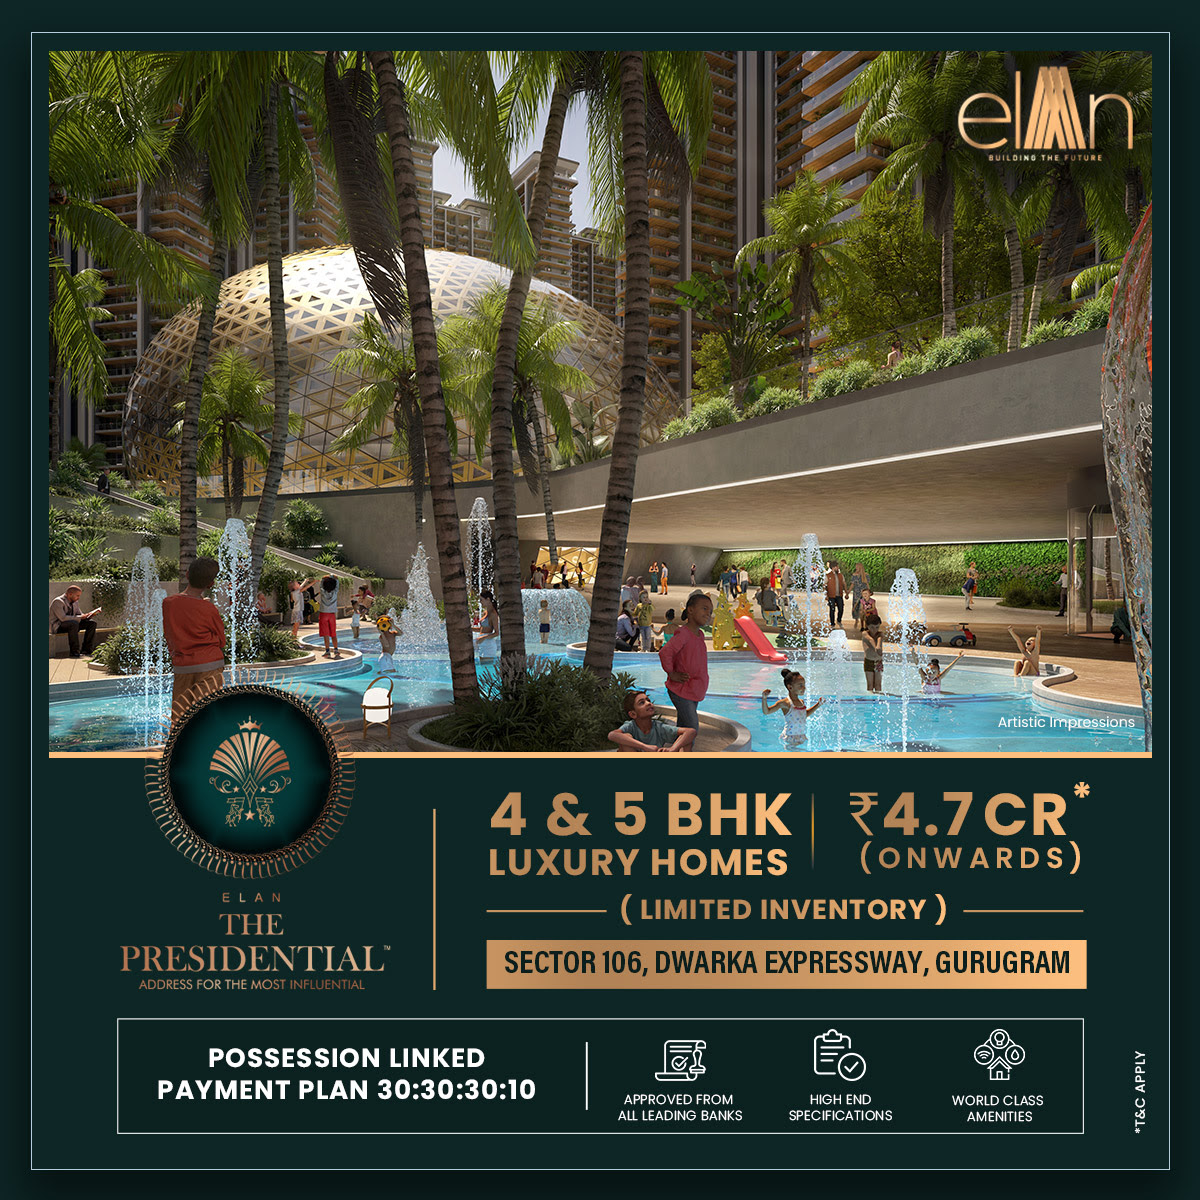 Posession linked payment plan 30:30:30:10 and approved from all leading banks at Elan The Presidential, Gurgaon Update